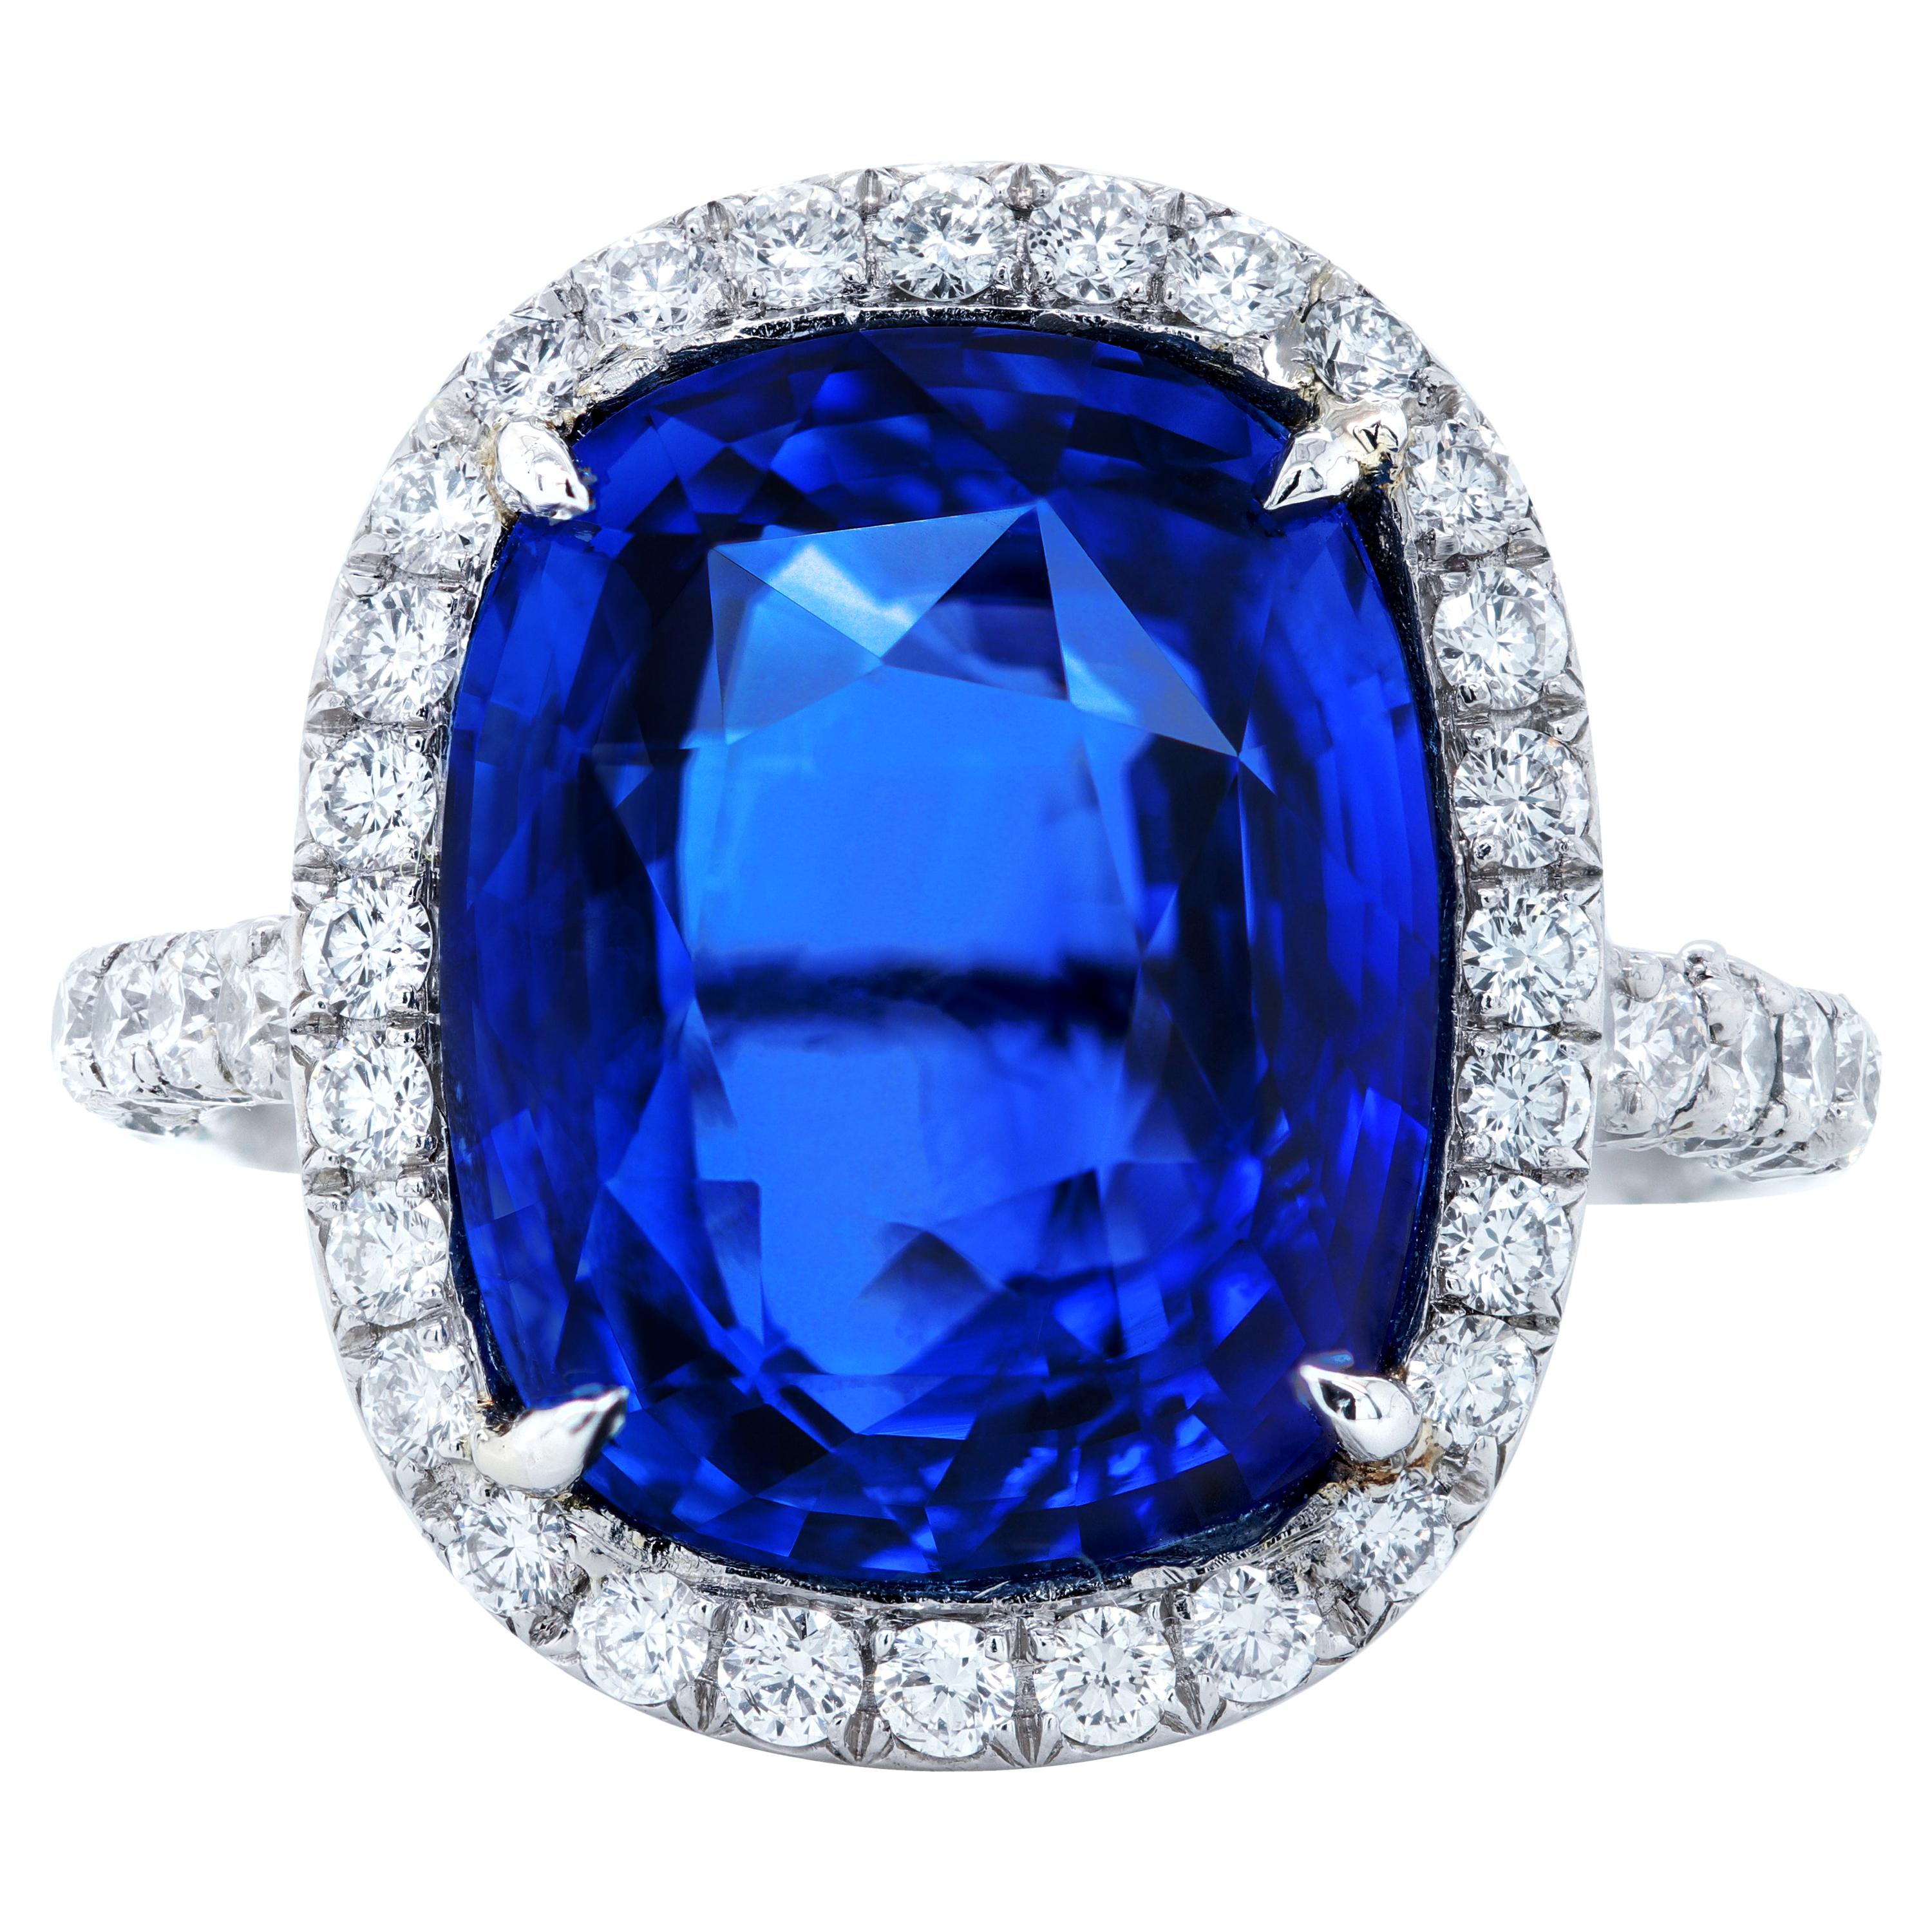 Certified 9.55 Carat Royal Blue Sapphire Diamond Ring For Sale at 1stDibs